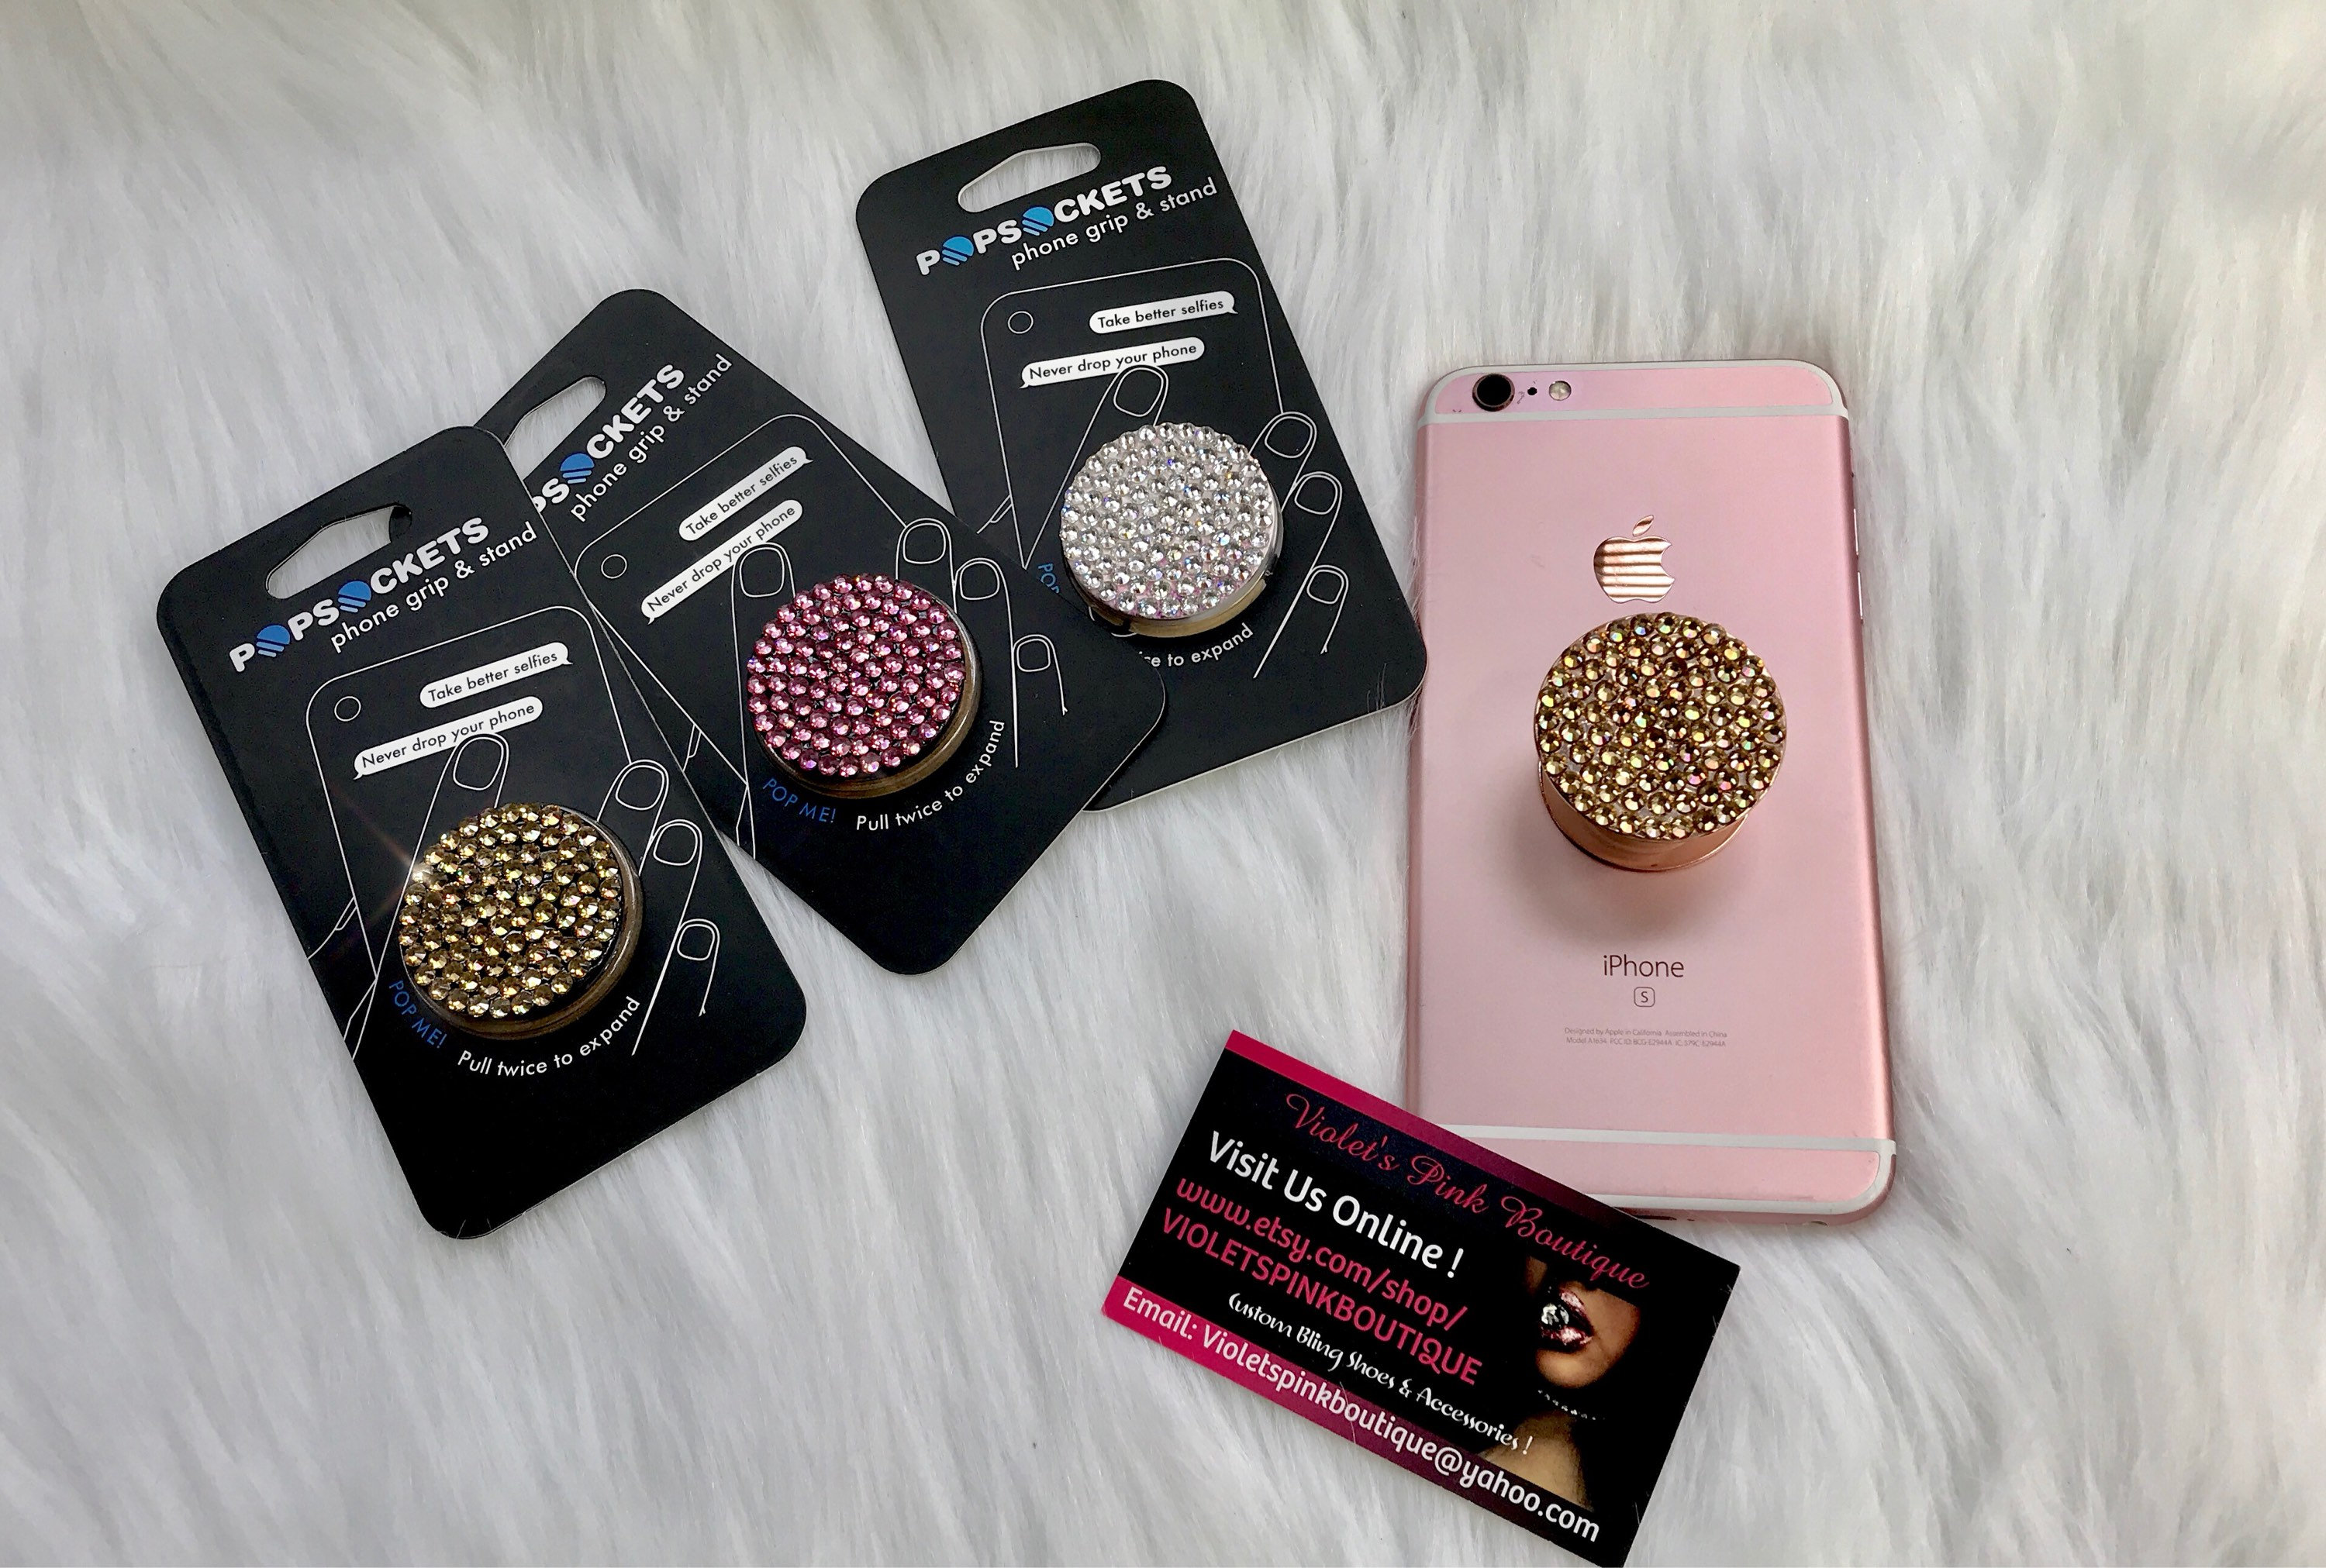 PopSocket, Cell Phones & Accessories